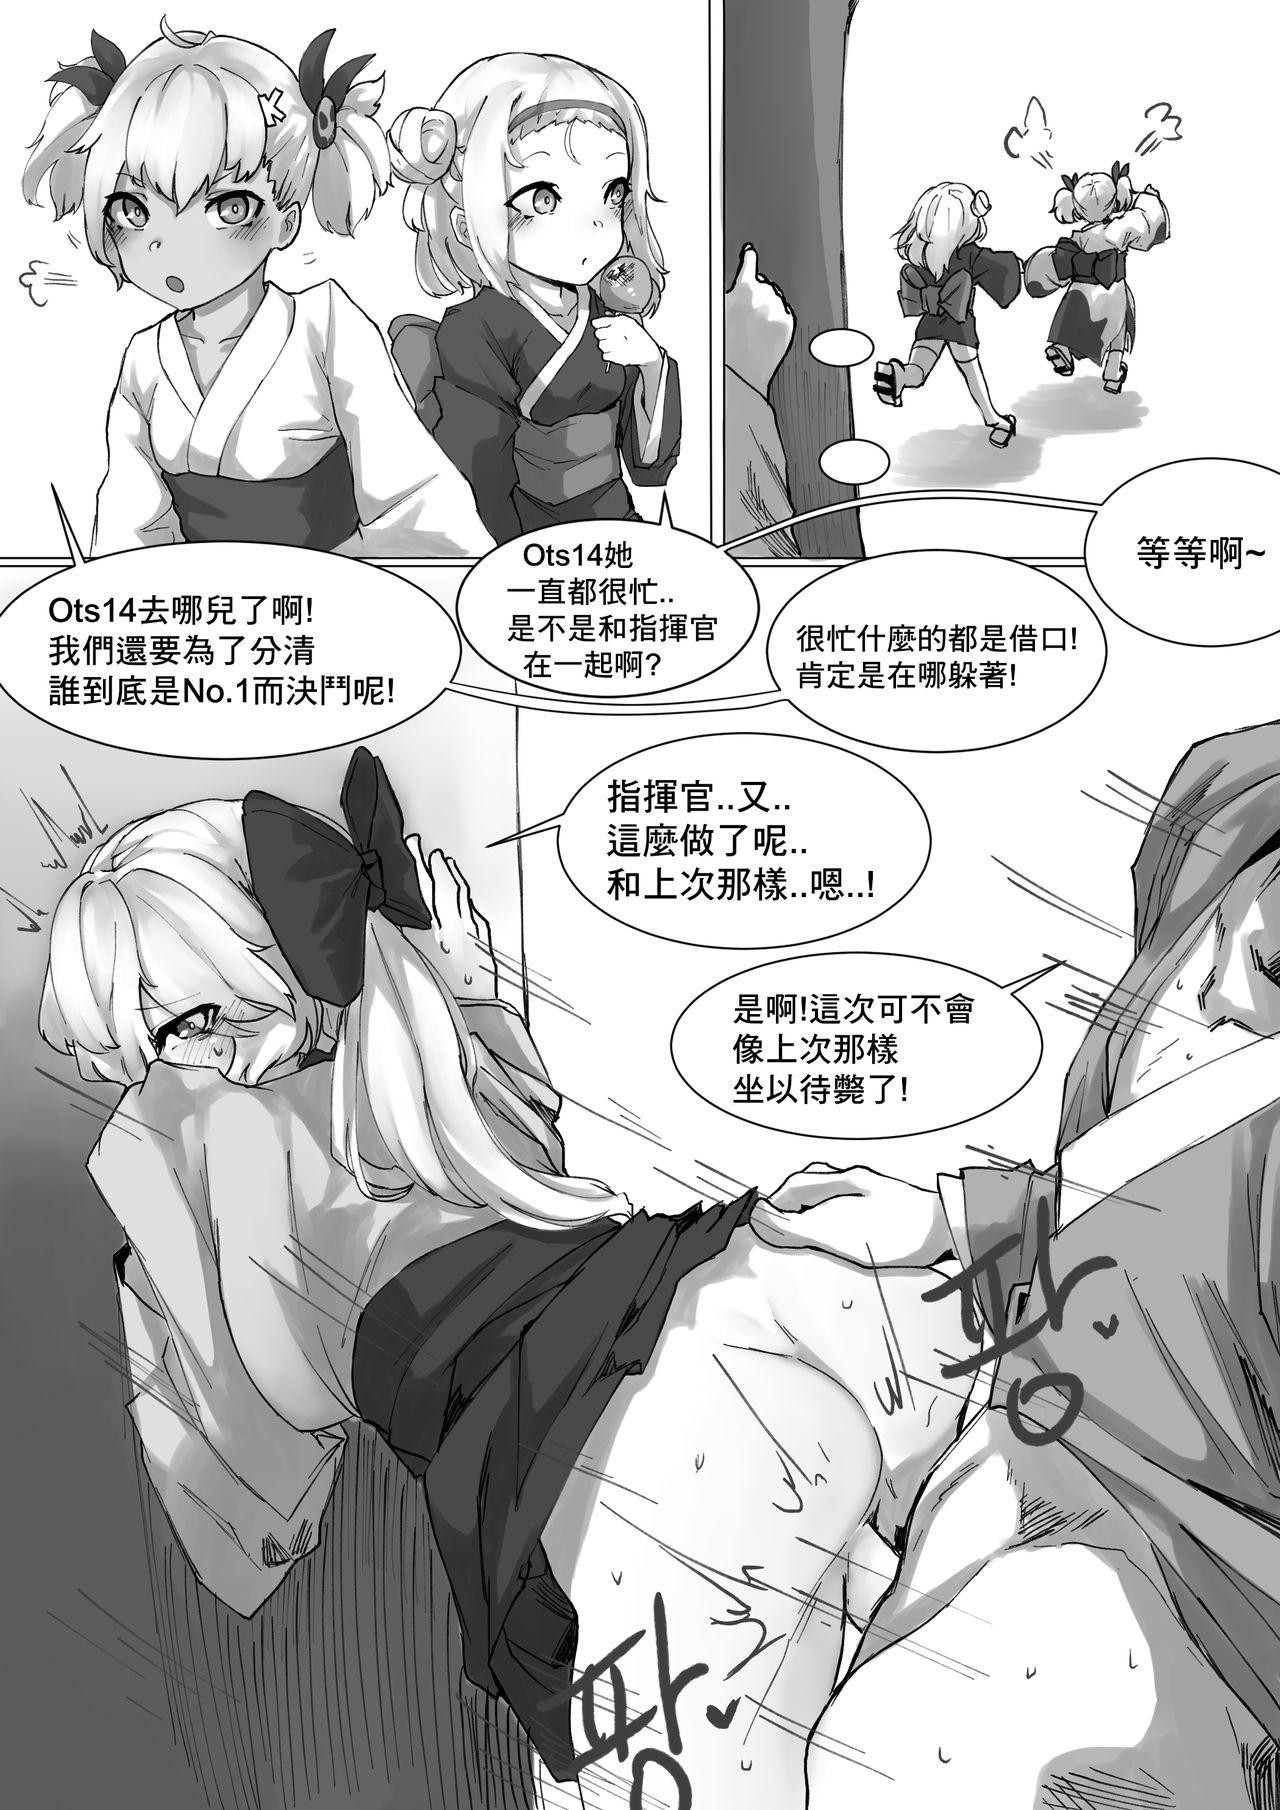 Hardon How To Use OTS-14 - Girls frontline Assfucking - Page 10